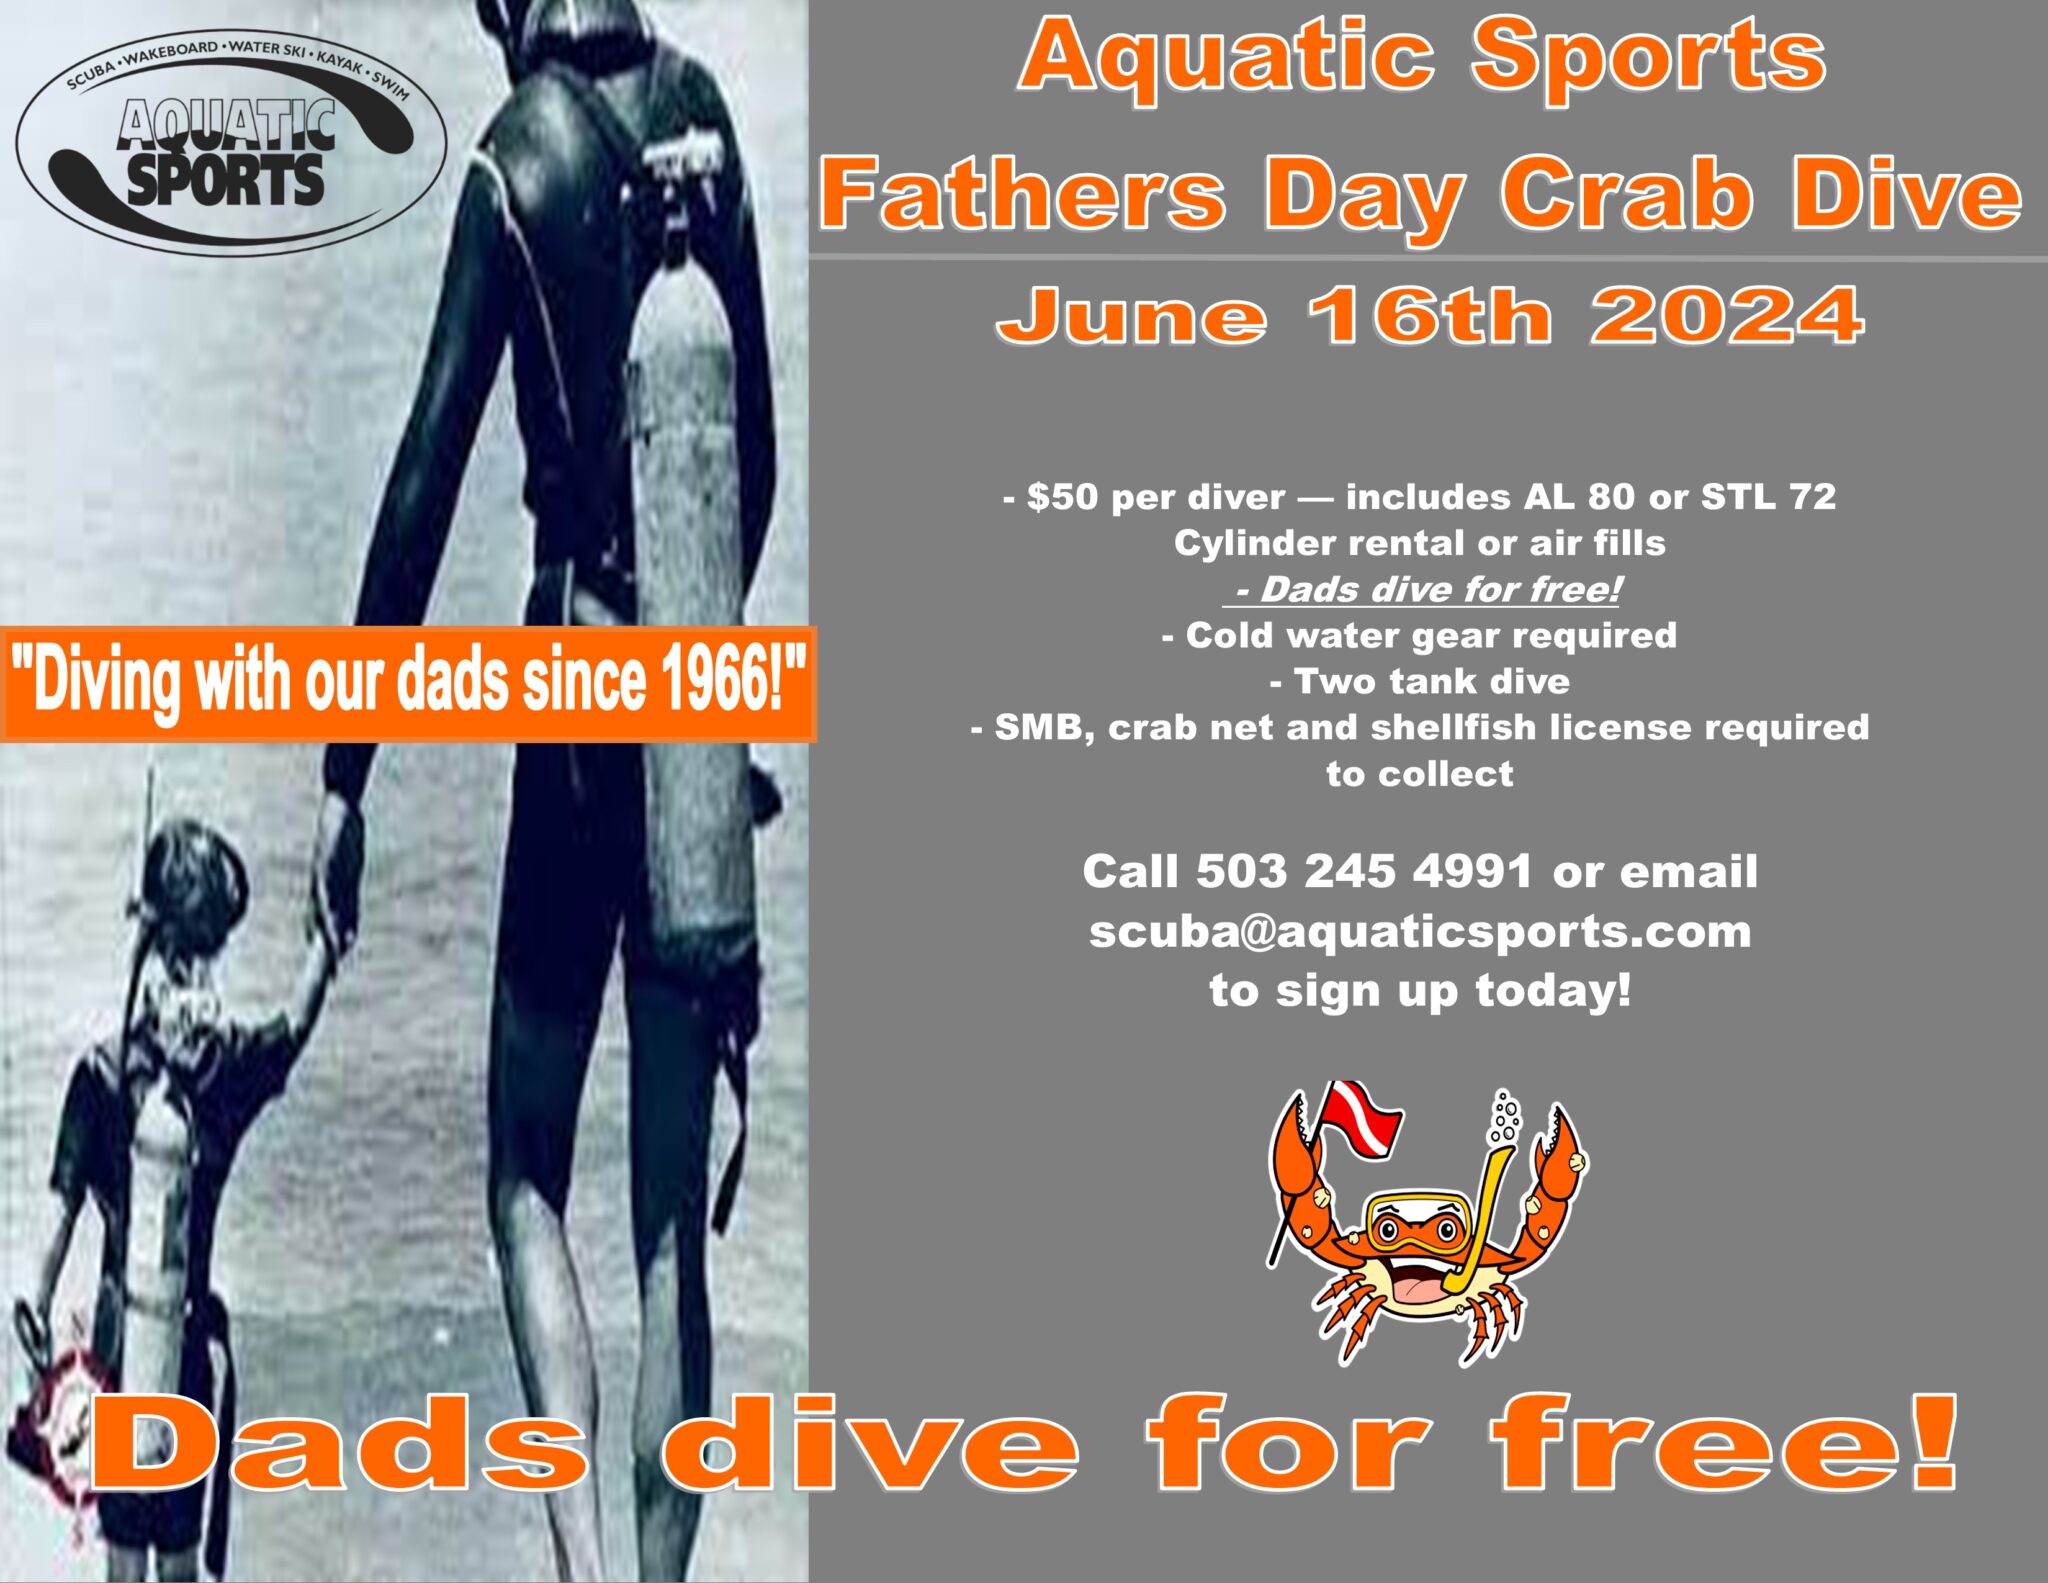 Dads dive for free this Father's Day with Aquatic Sports